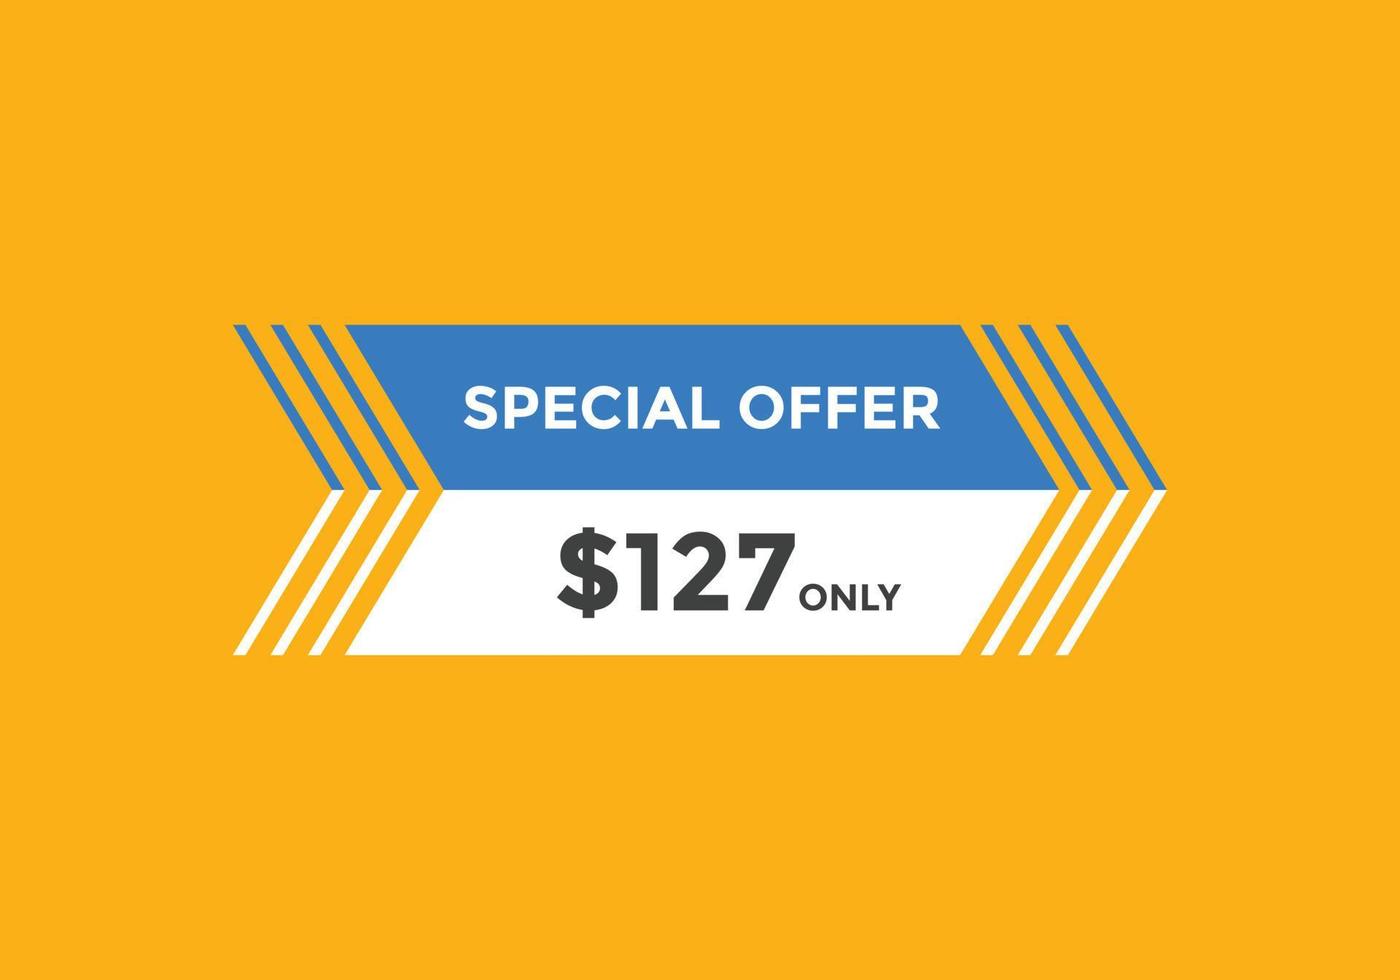 127 dollar price tag. Price 127 USD dollar only Sticker sale promotion Design. shop now button for Business or shopping promotion vector